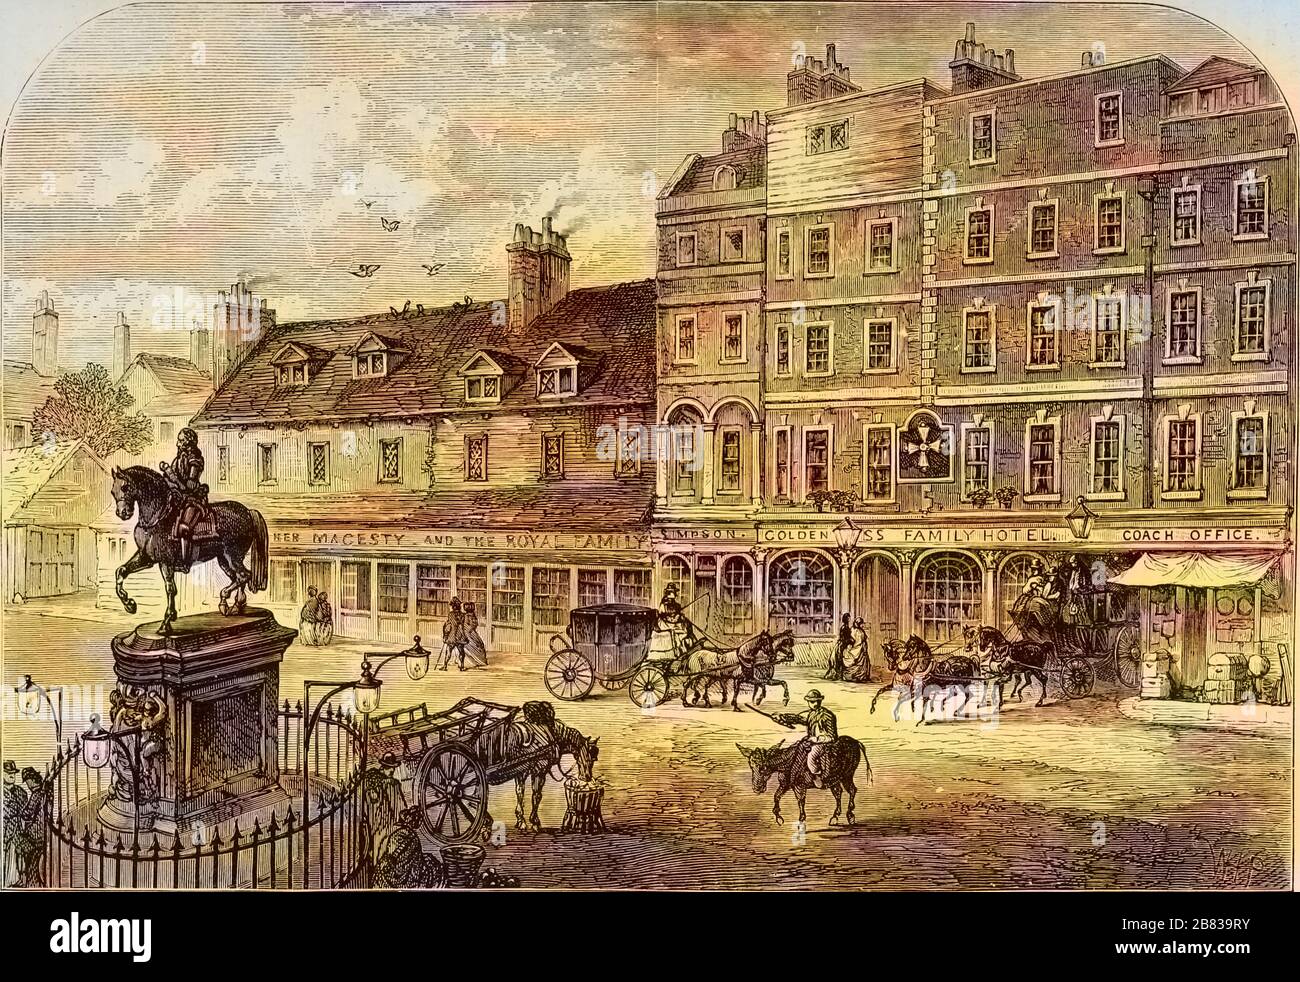 Engraving of the statue in front of the Northumberland House at Charing Cross, London, England, from the book 'Old and new London: a narrative of its history, its people, and its places' by Thornbury Walter, 1873. Courtesy Internet Archive. Note: Image has been digitally colorized using a modern process. Colors may not be period-accurate. () Stock Photo